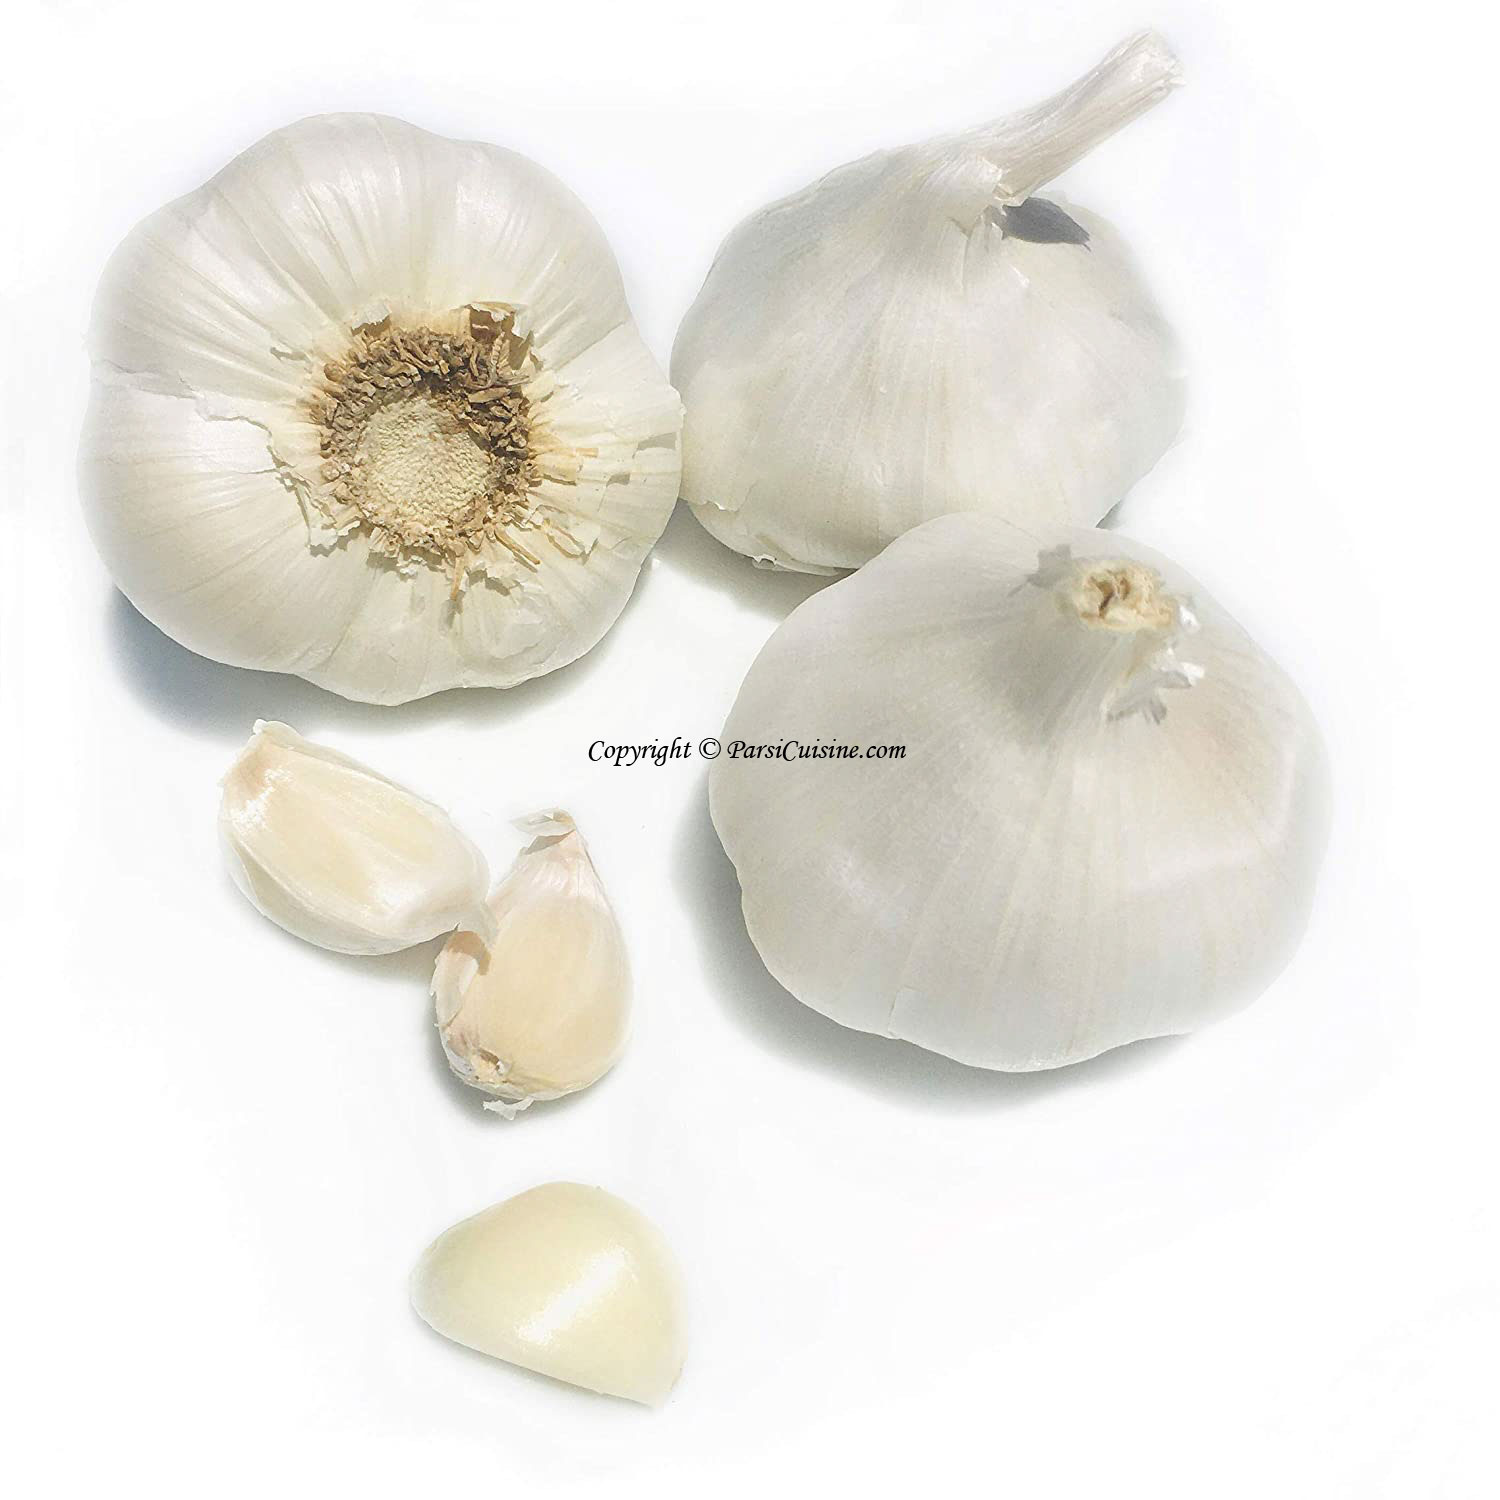 Health Effects of Garlic and how it is used in Parsi Food.